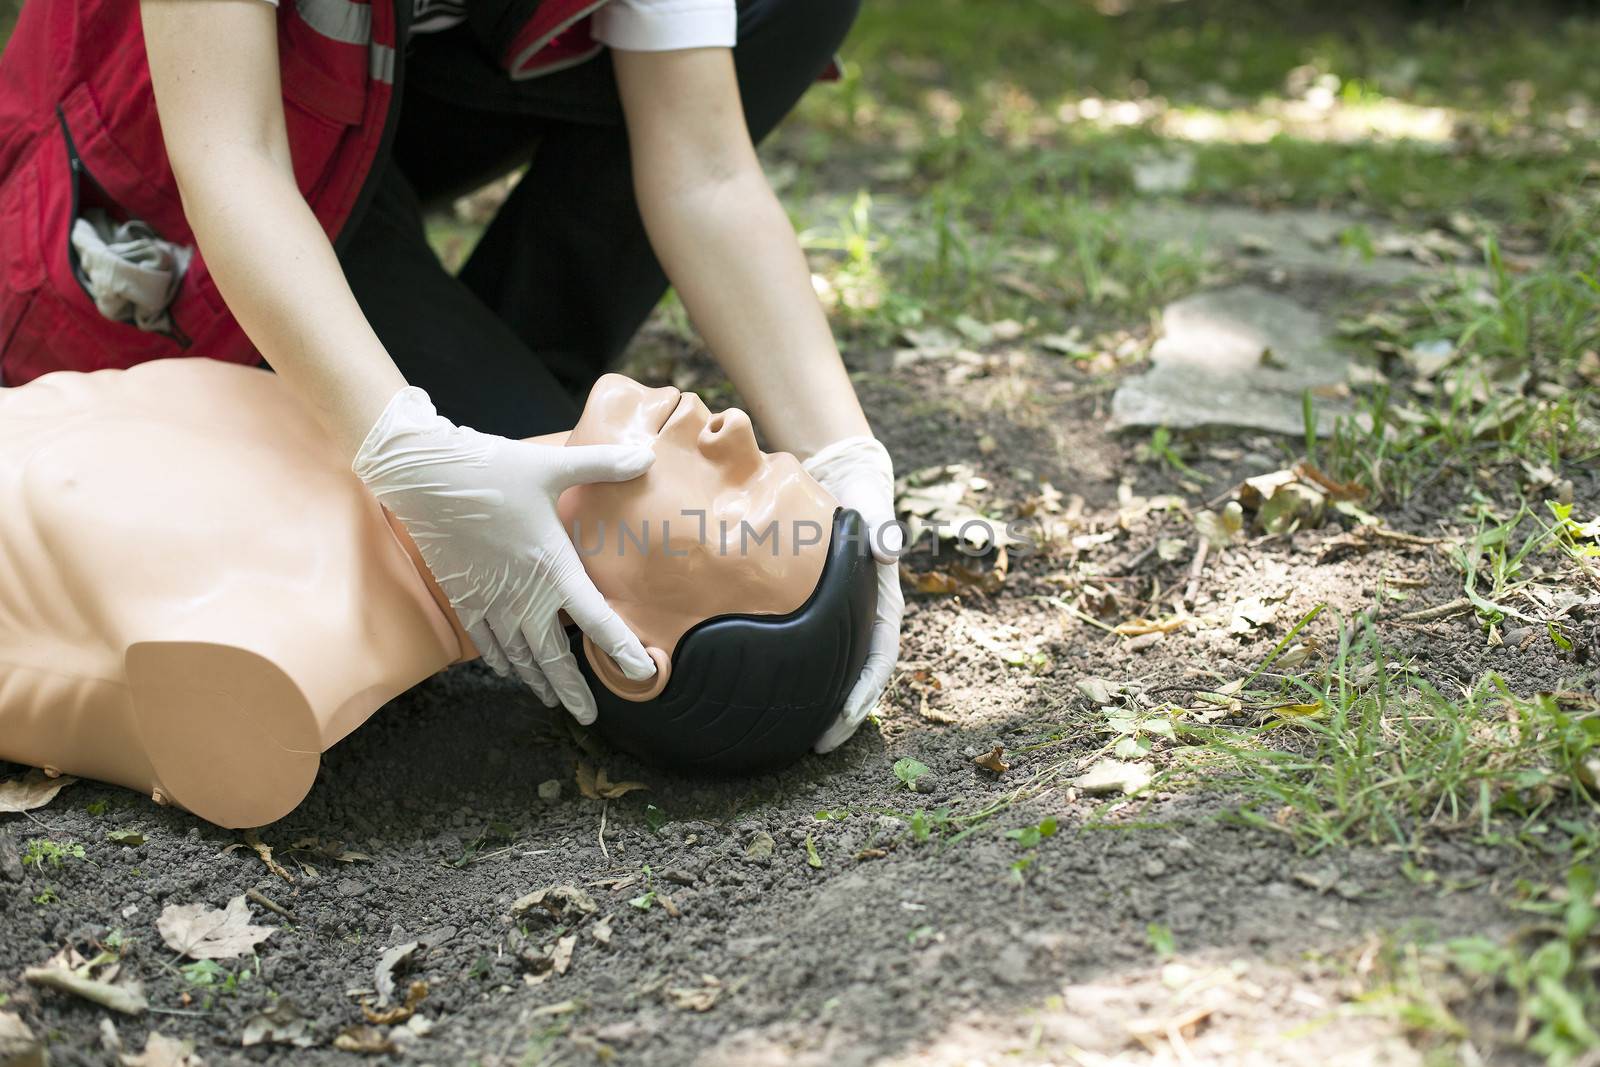 CPR training detail by wellphoto